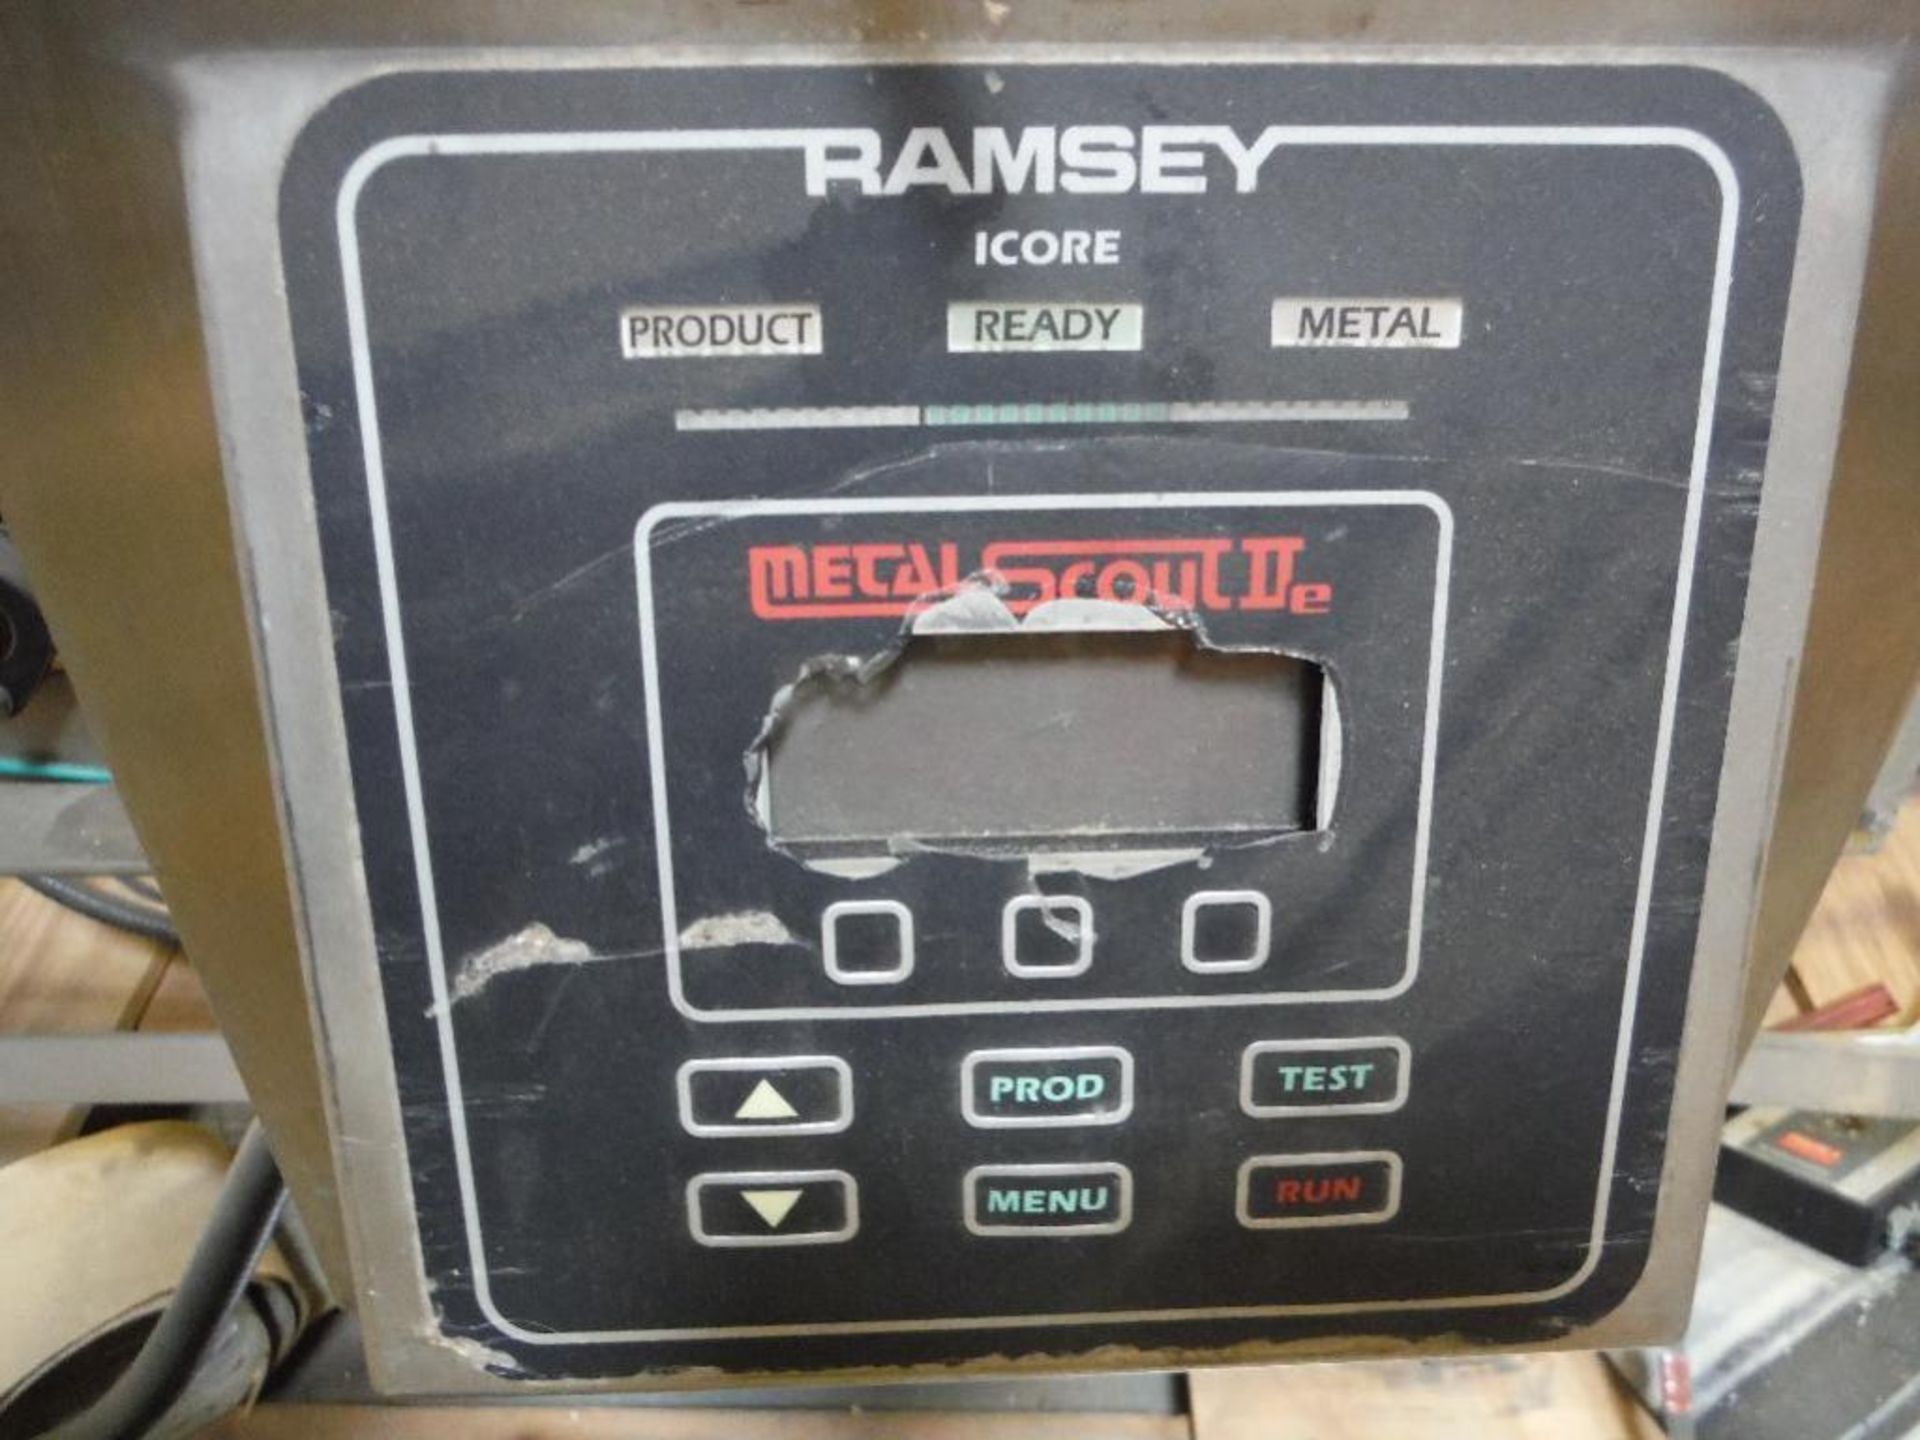 Ramsey Icore metal detector, 14 in. wide x 3 in. tall aperture, SS frame, motor and drive ** Rigging - Image 3 of 7